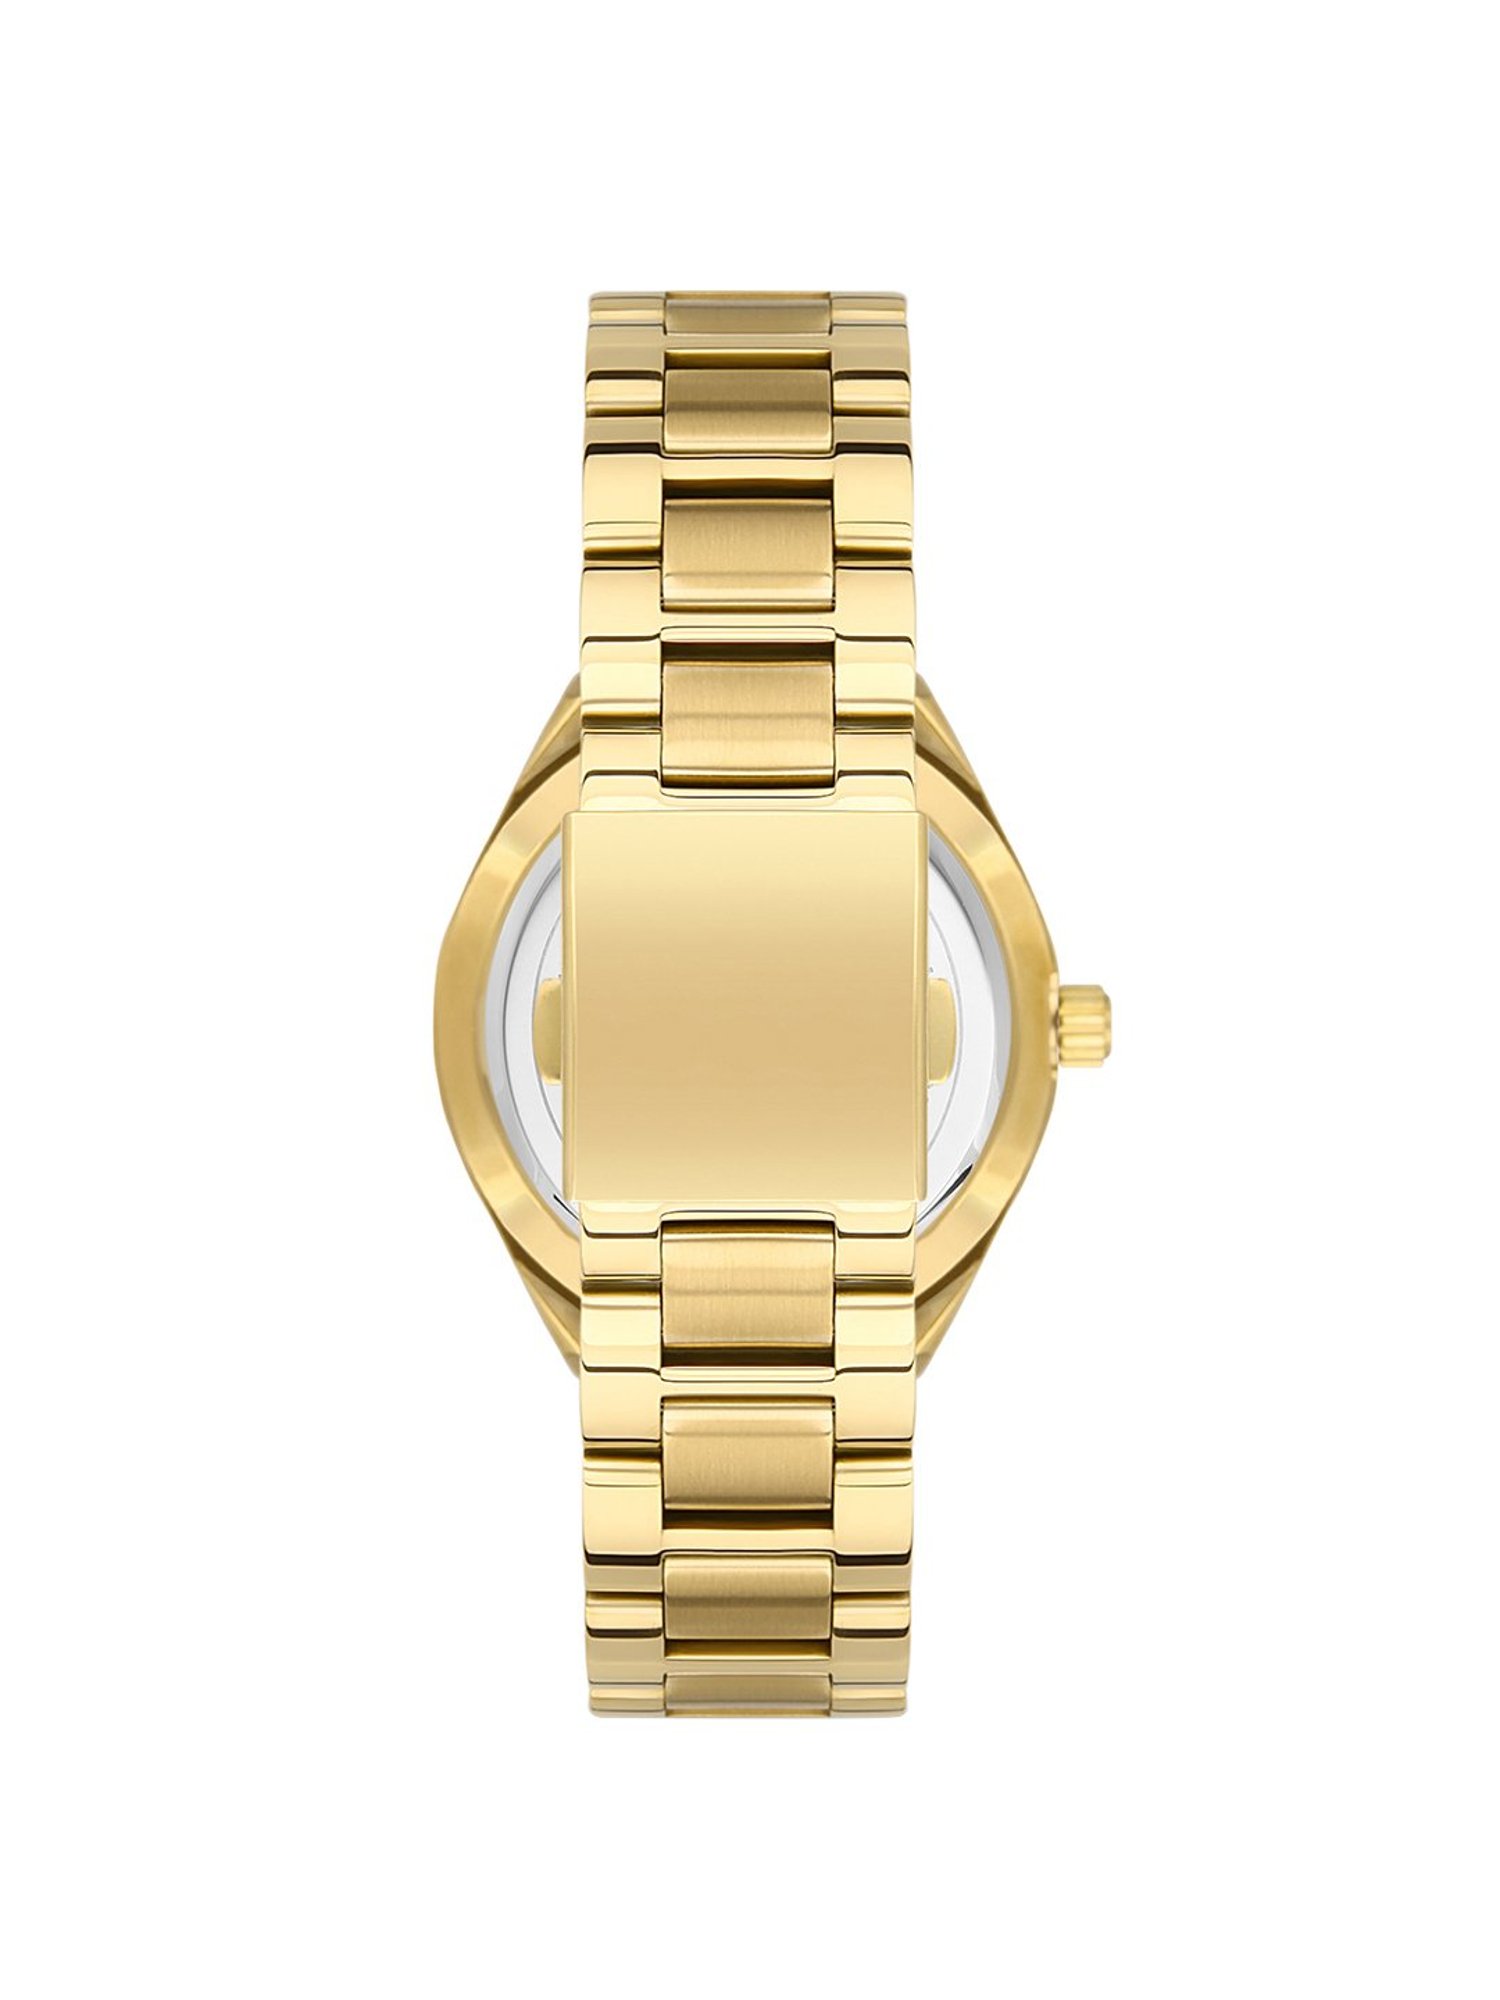 Aether Gold Element Men's Watch Collection | MVMT